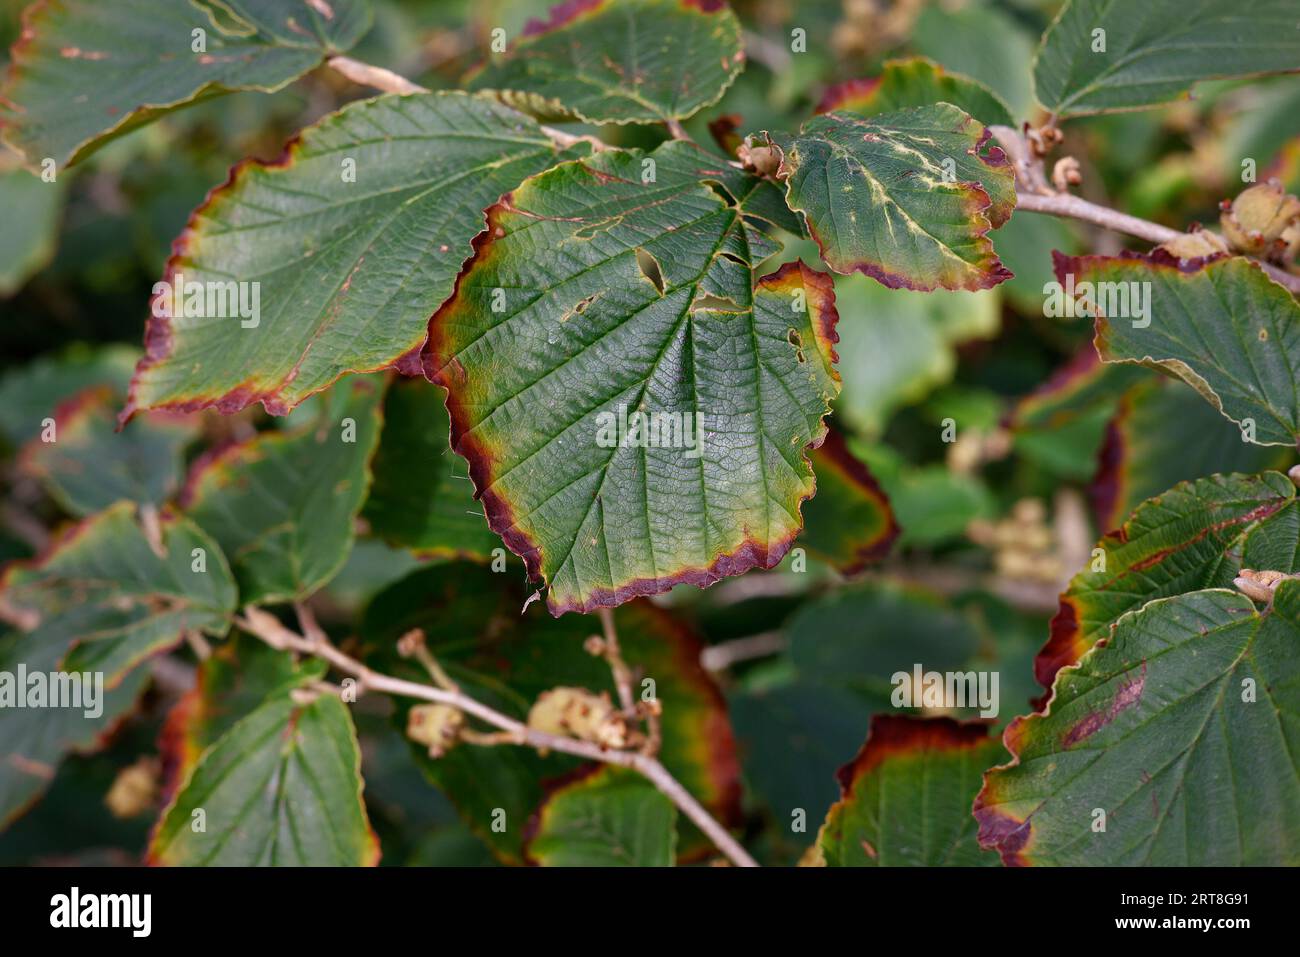 Closeup of the green summer leaves with a brown edge of the perennial garden shrub or small tree hamamelis intermedia pallida. Stock Photo